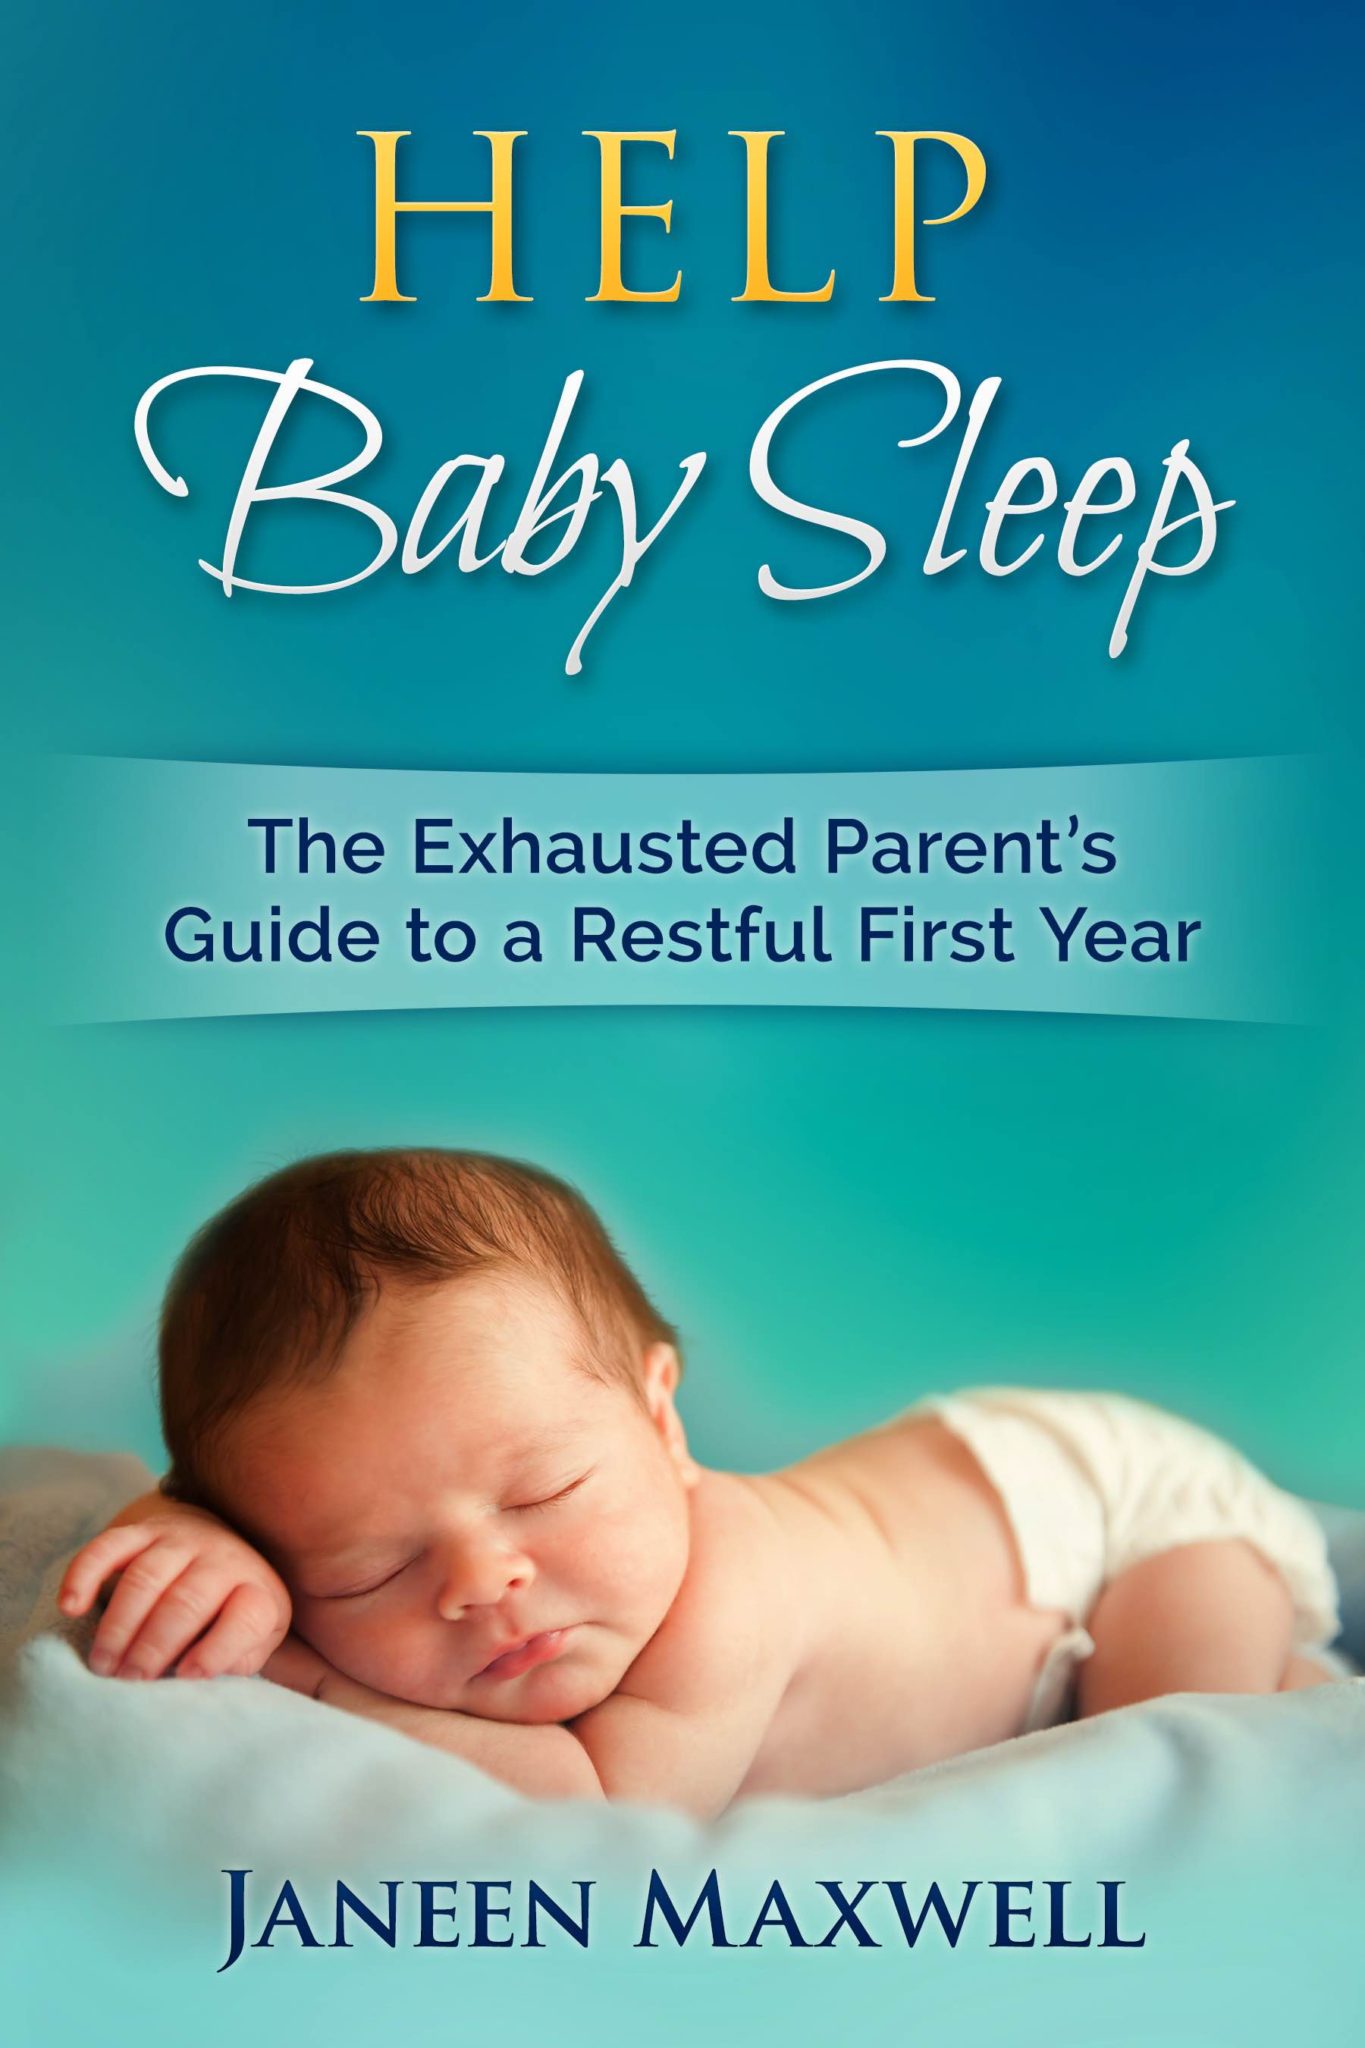 FREE: Help Baby Sleep: The Exhausted Parent’s Guide to a Restful First Year by Janeen Maxwell